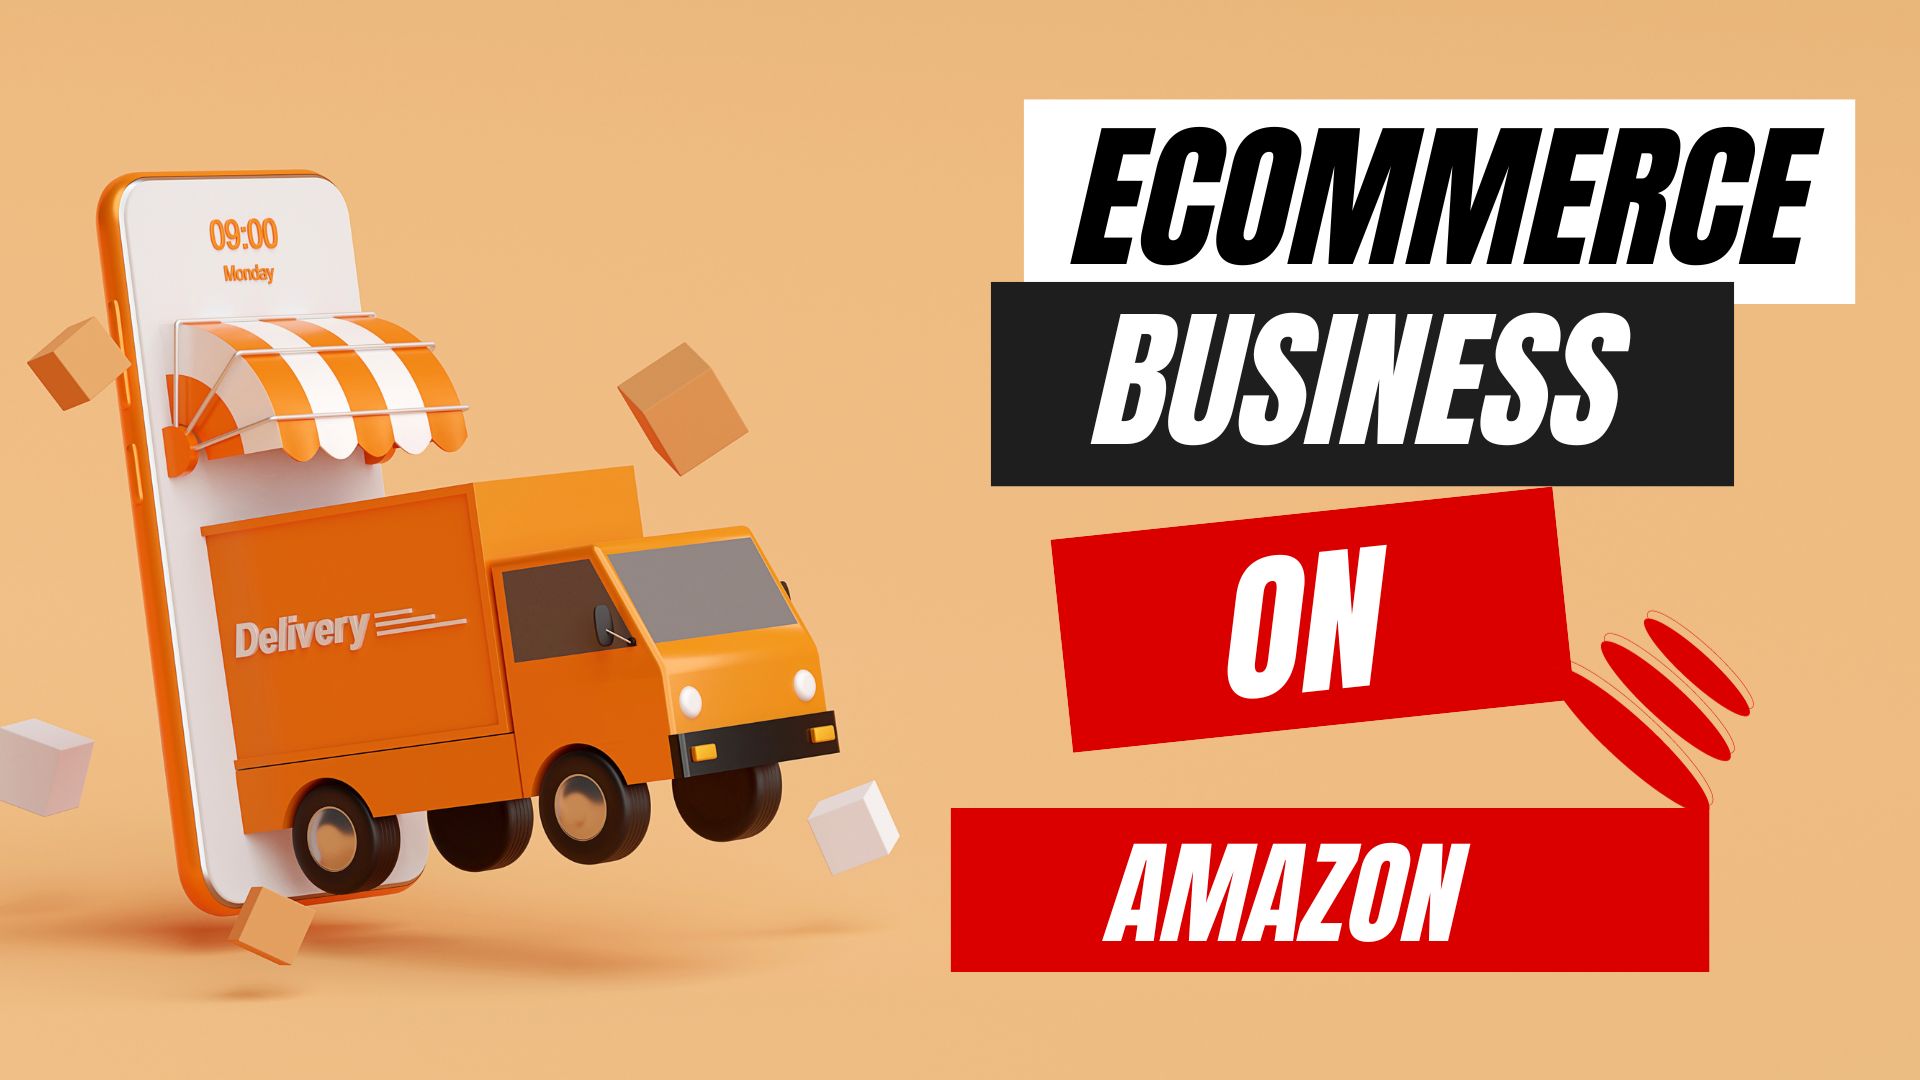 how to start an ecommerce business on amazon